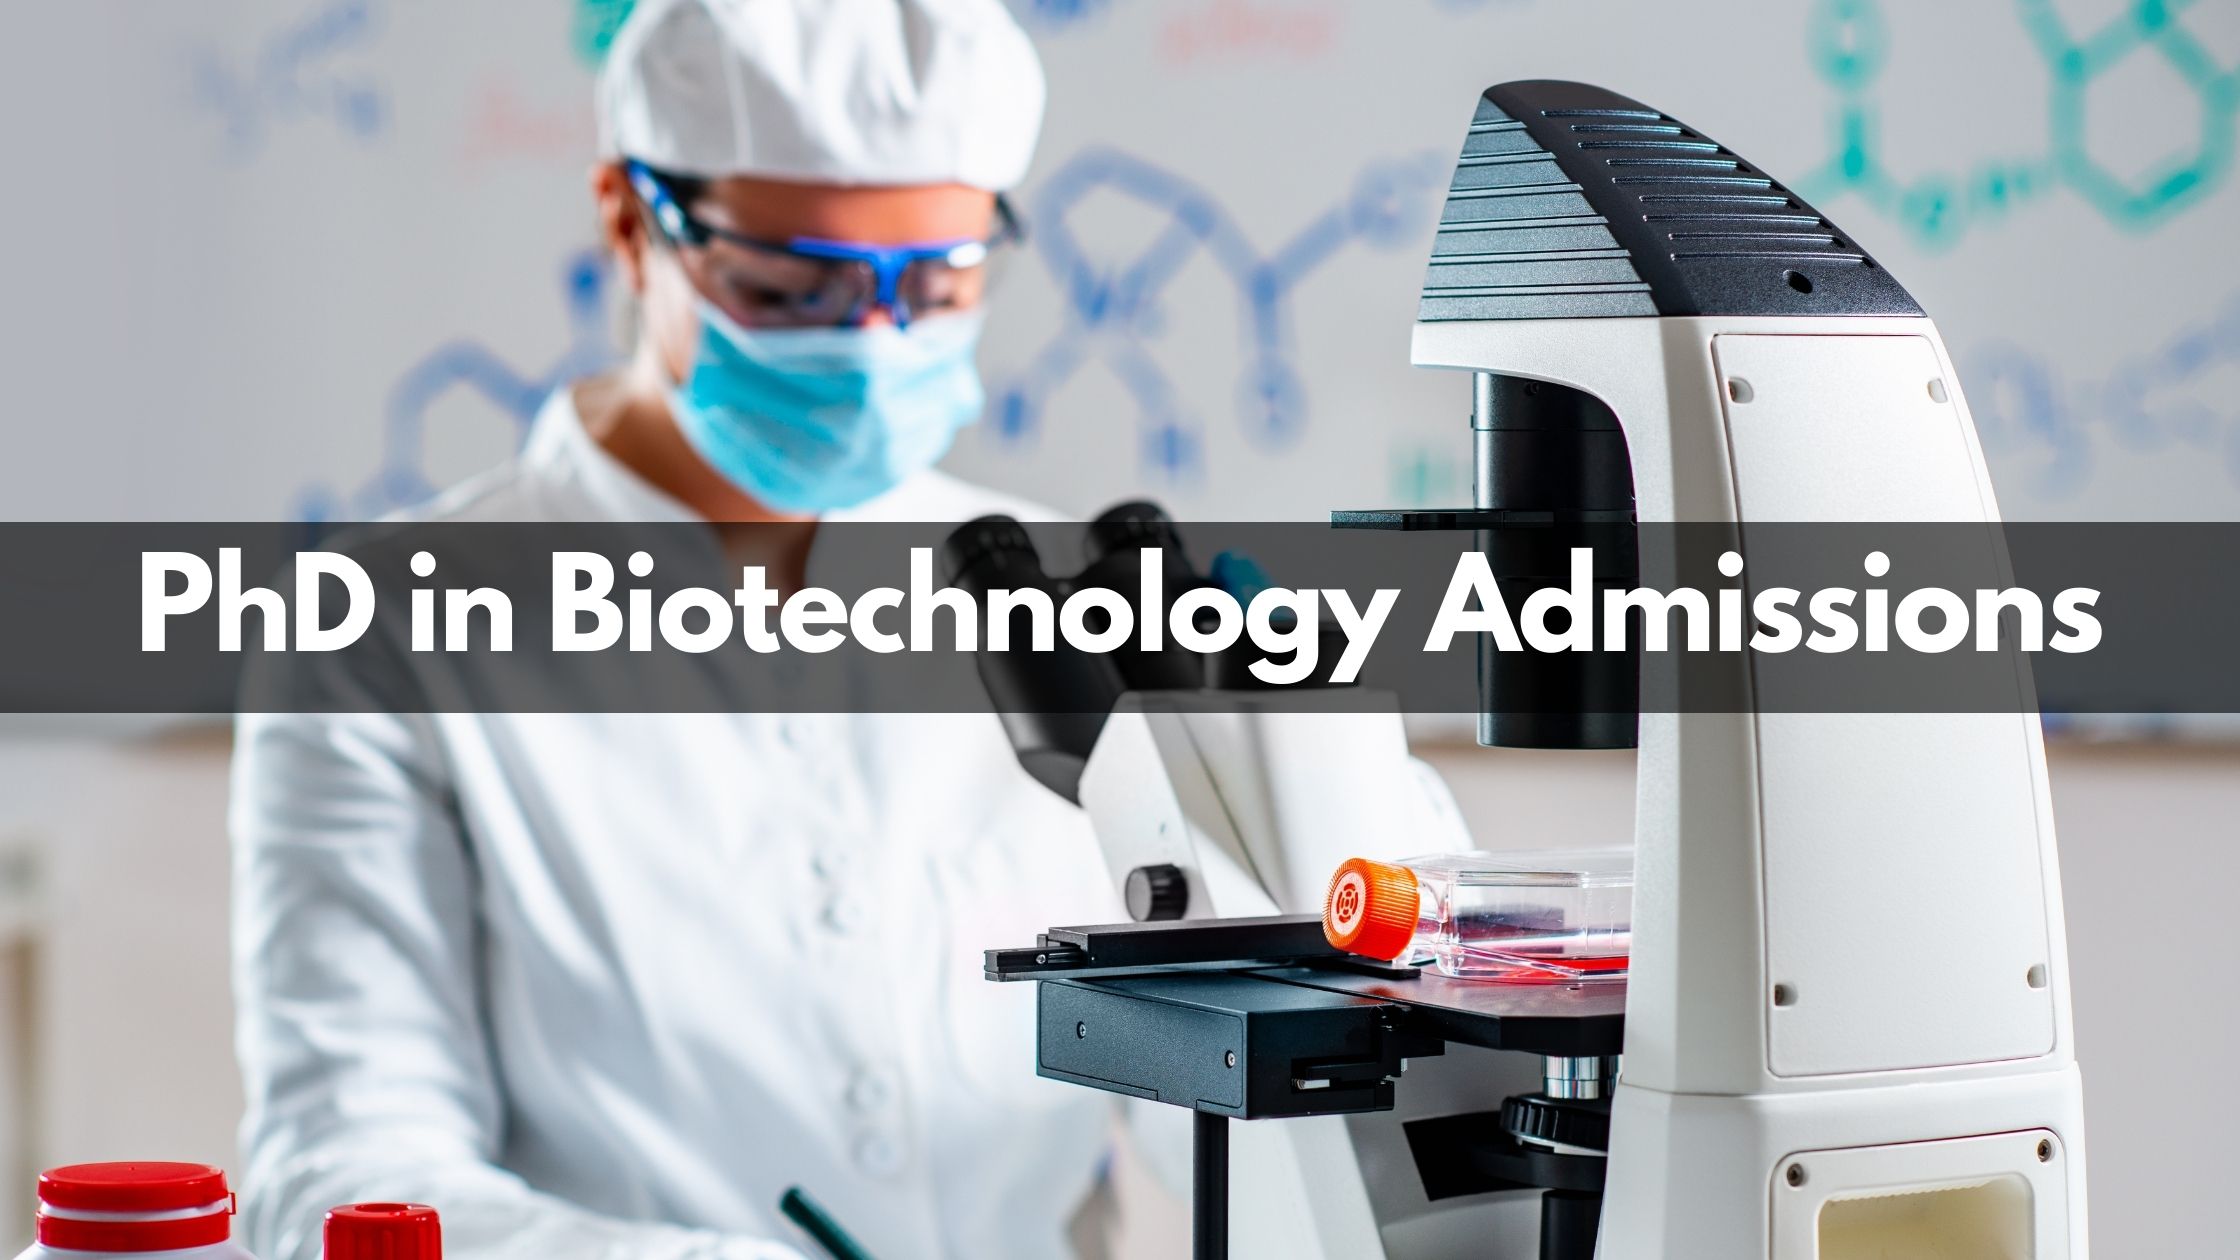 PhD in Biotechnology Admissions